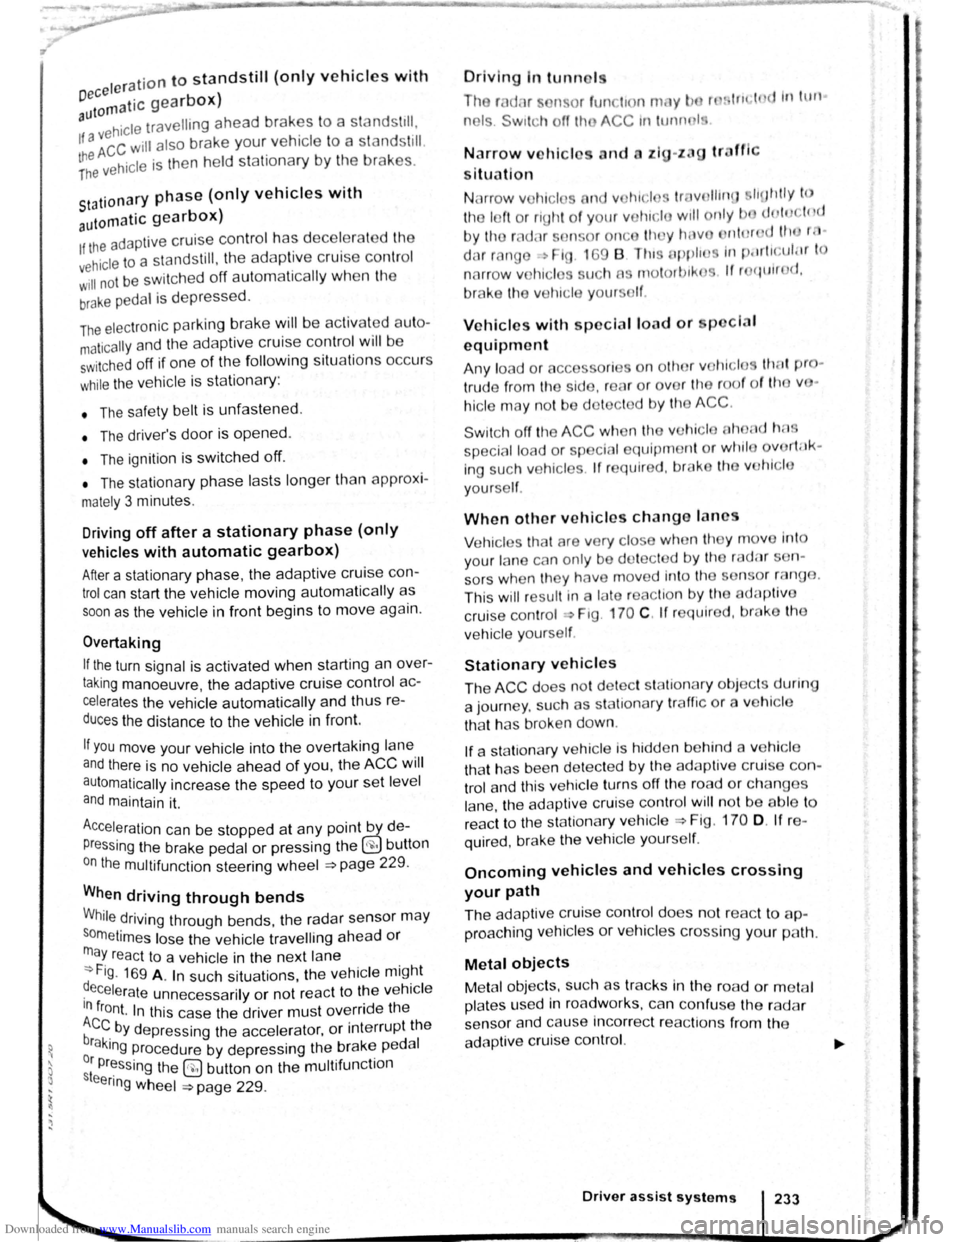 VOLKSWAGEN BEETLE 2009  Owners Manual Downloaded from www.Manualslib.com manuals search engine I ation to standstill (only vehicles with pece er ) 
rnatic gearbox 3uto hicle  travelling ahead brakes to  a standst1ll , 
If a ;~c will also 